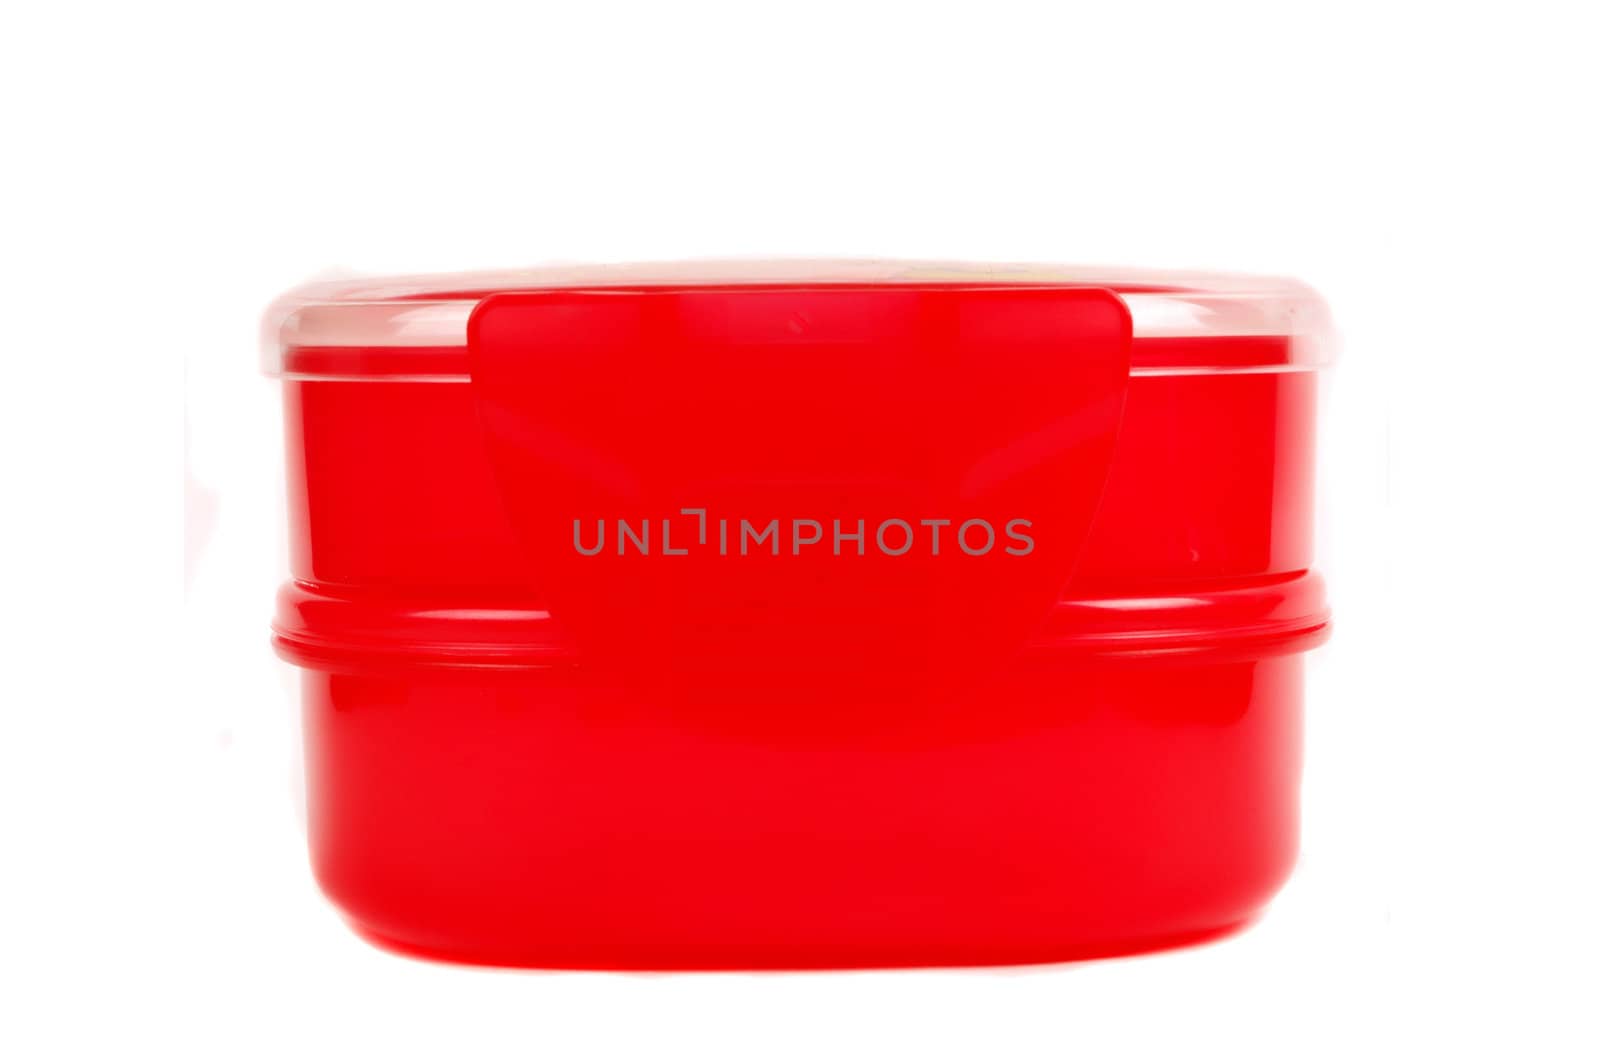 a red plastic container for preschoolers food stock  by antonihalim